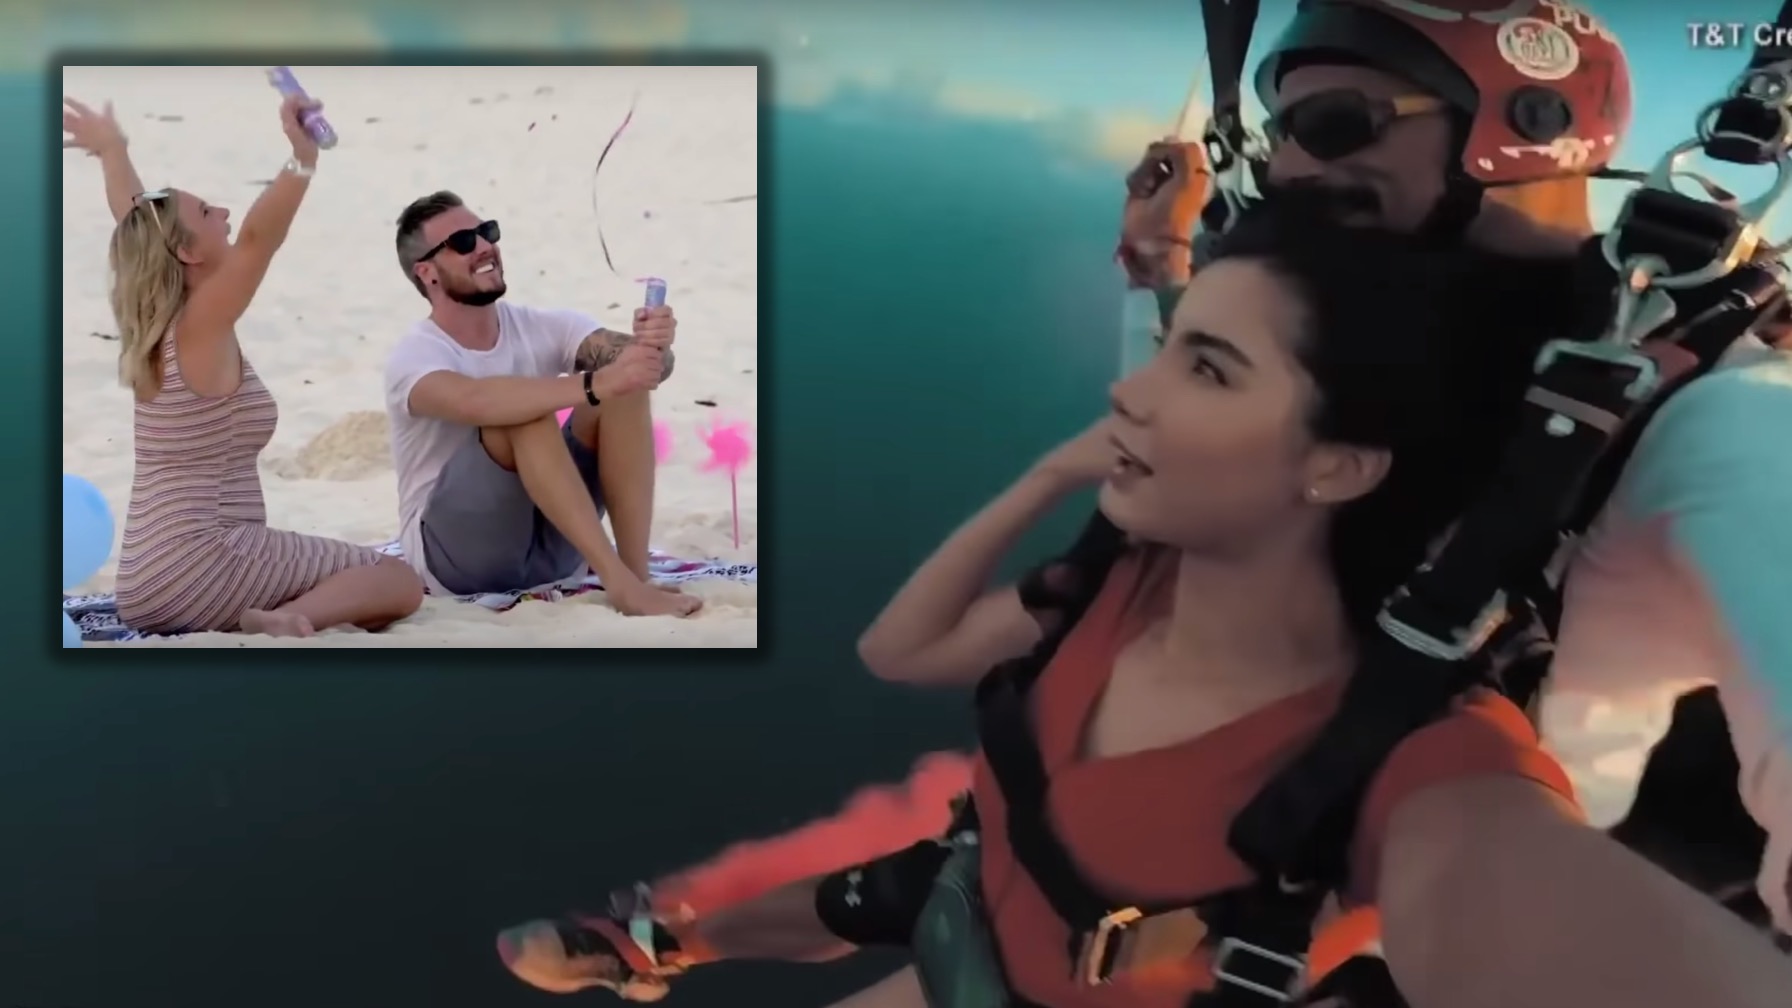 Oh No, Skydiving Gender Reveals Are a Thing Now [WATCH]